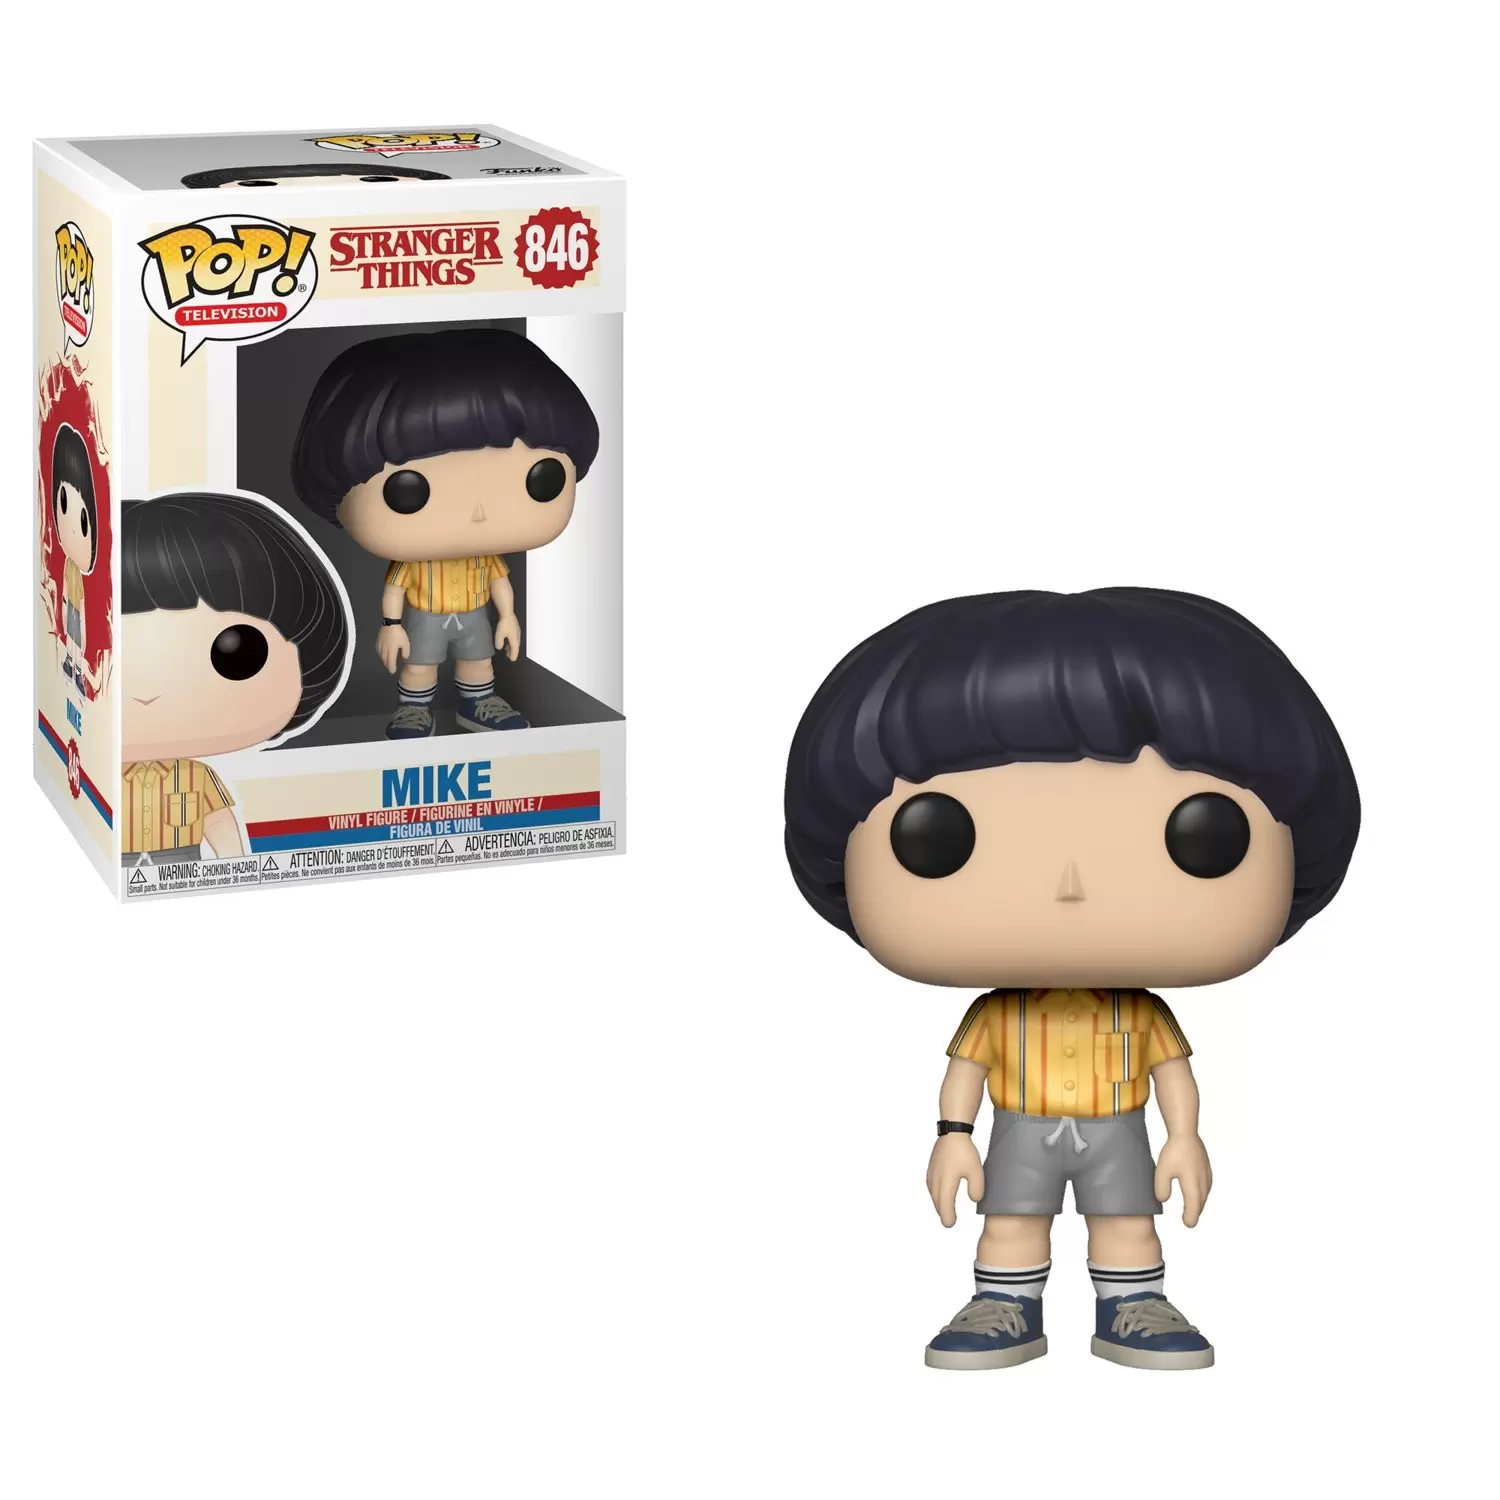 POP! Television - Stranger Things 3 - Mike